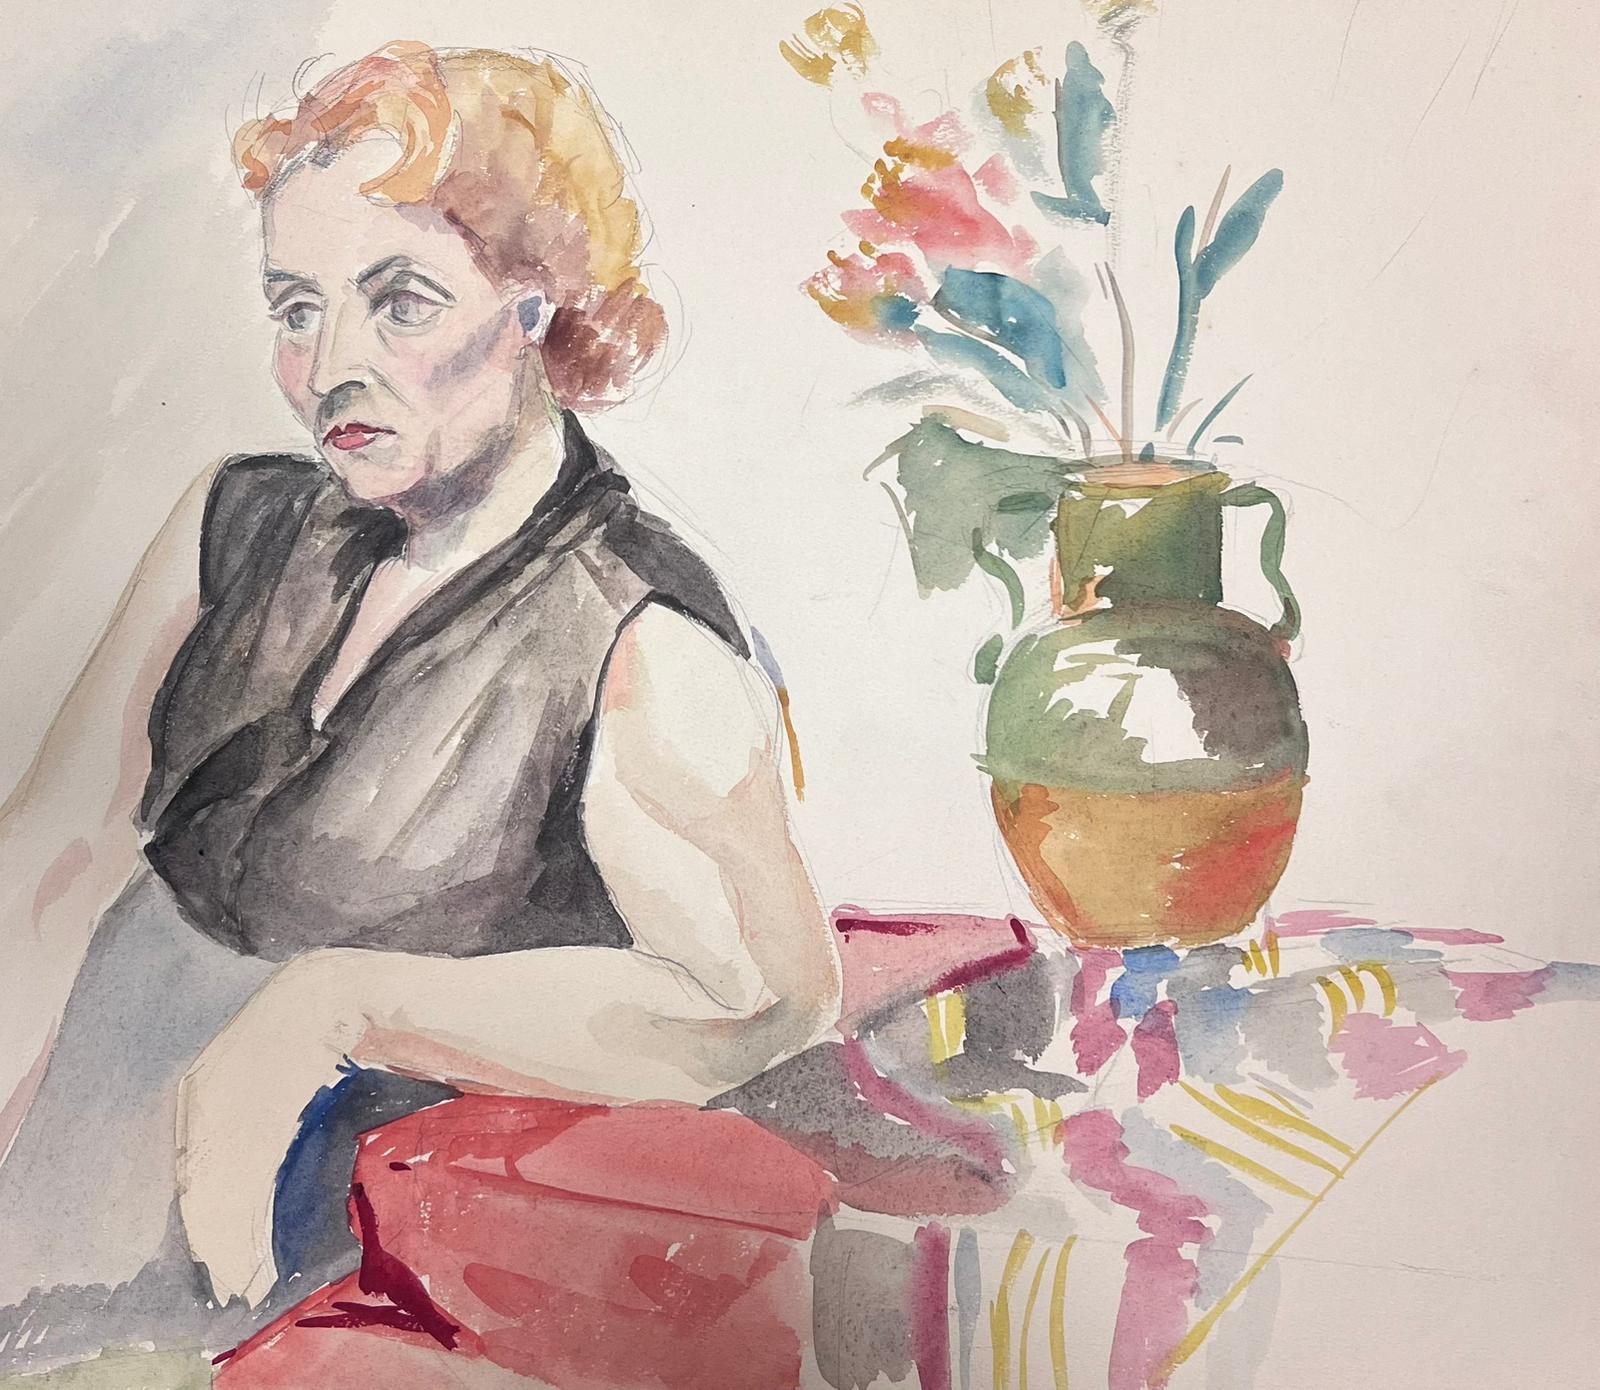 Lady in Interior
by Guy Nicod
(French 1923 - 2021)
watercolour on artist paper, unframed
stamped verso
painting : 15 x 16.75 inches
provenance: artists estate, France
condition: very good and sound condition